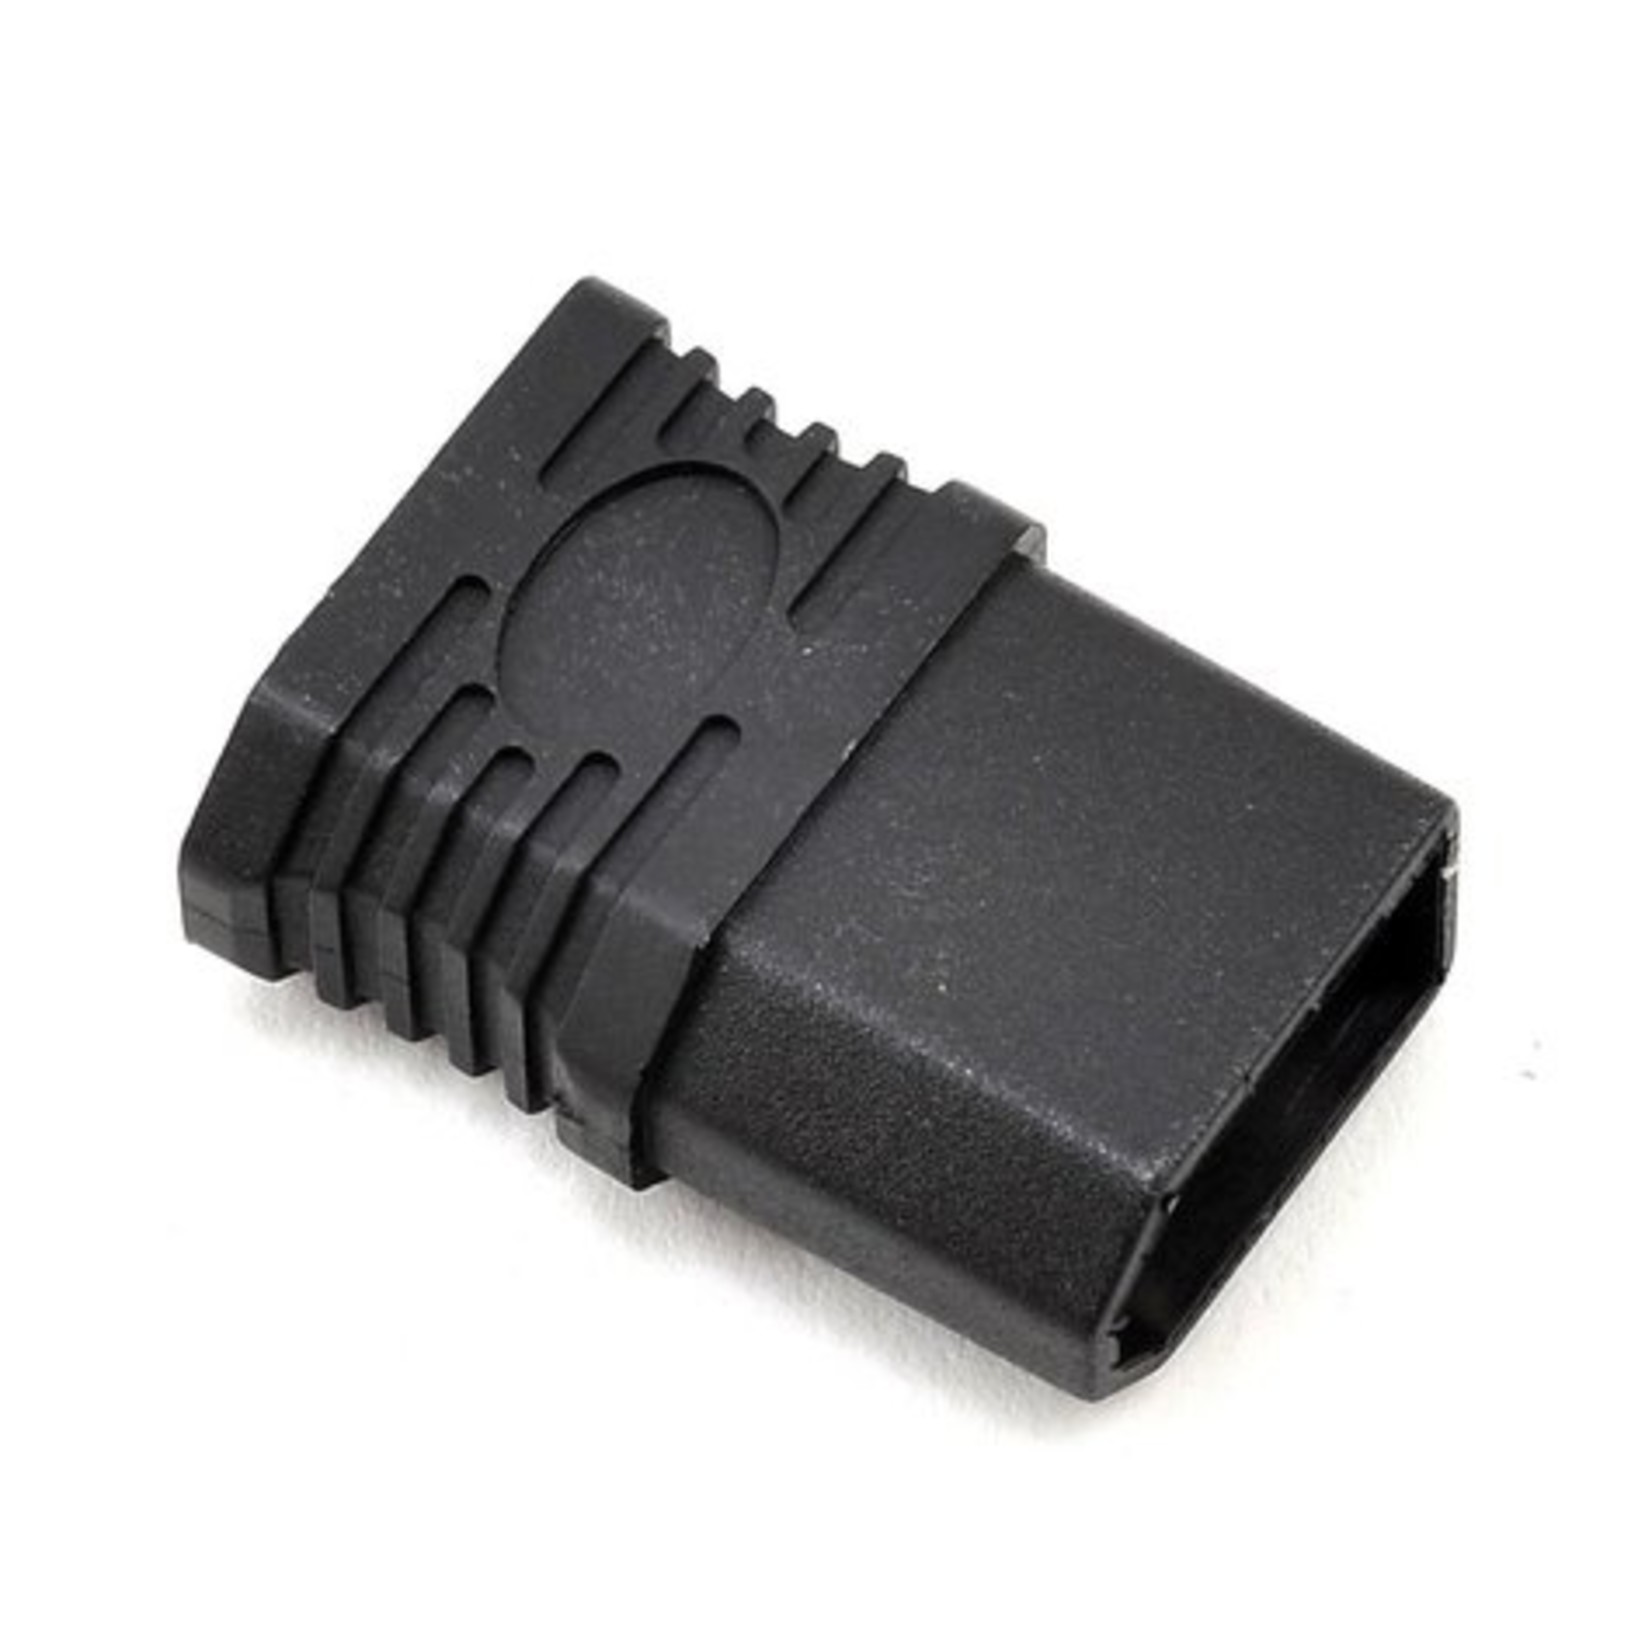 Fuse Battery FUSENP-9 Fuse Battery One Piece Adapter Plug (XT60 Male to T-plug Female)